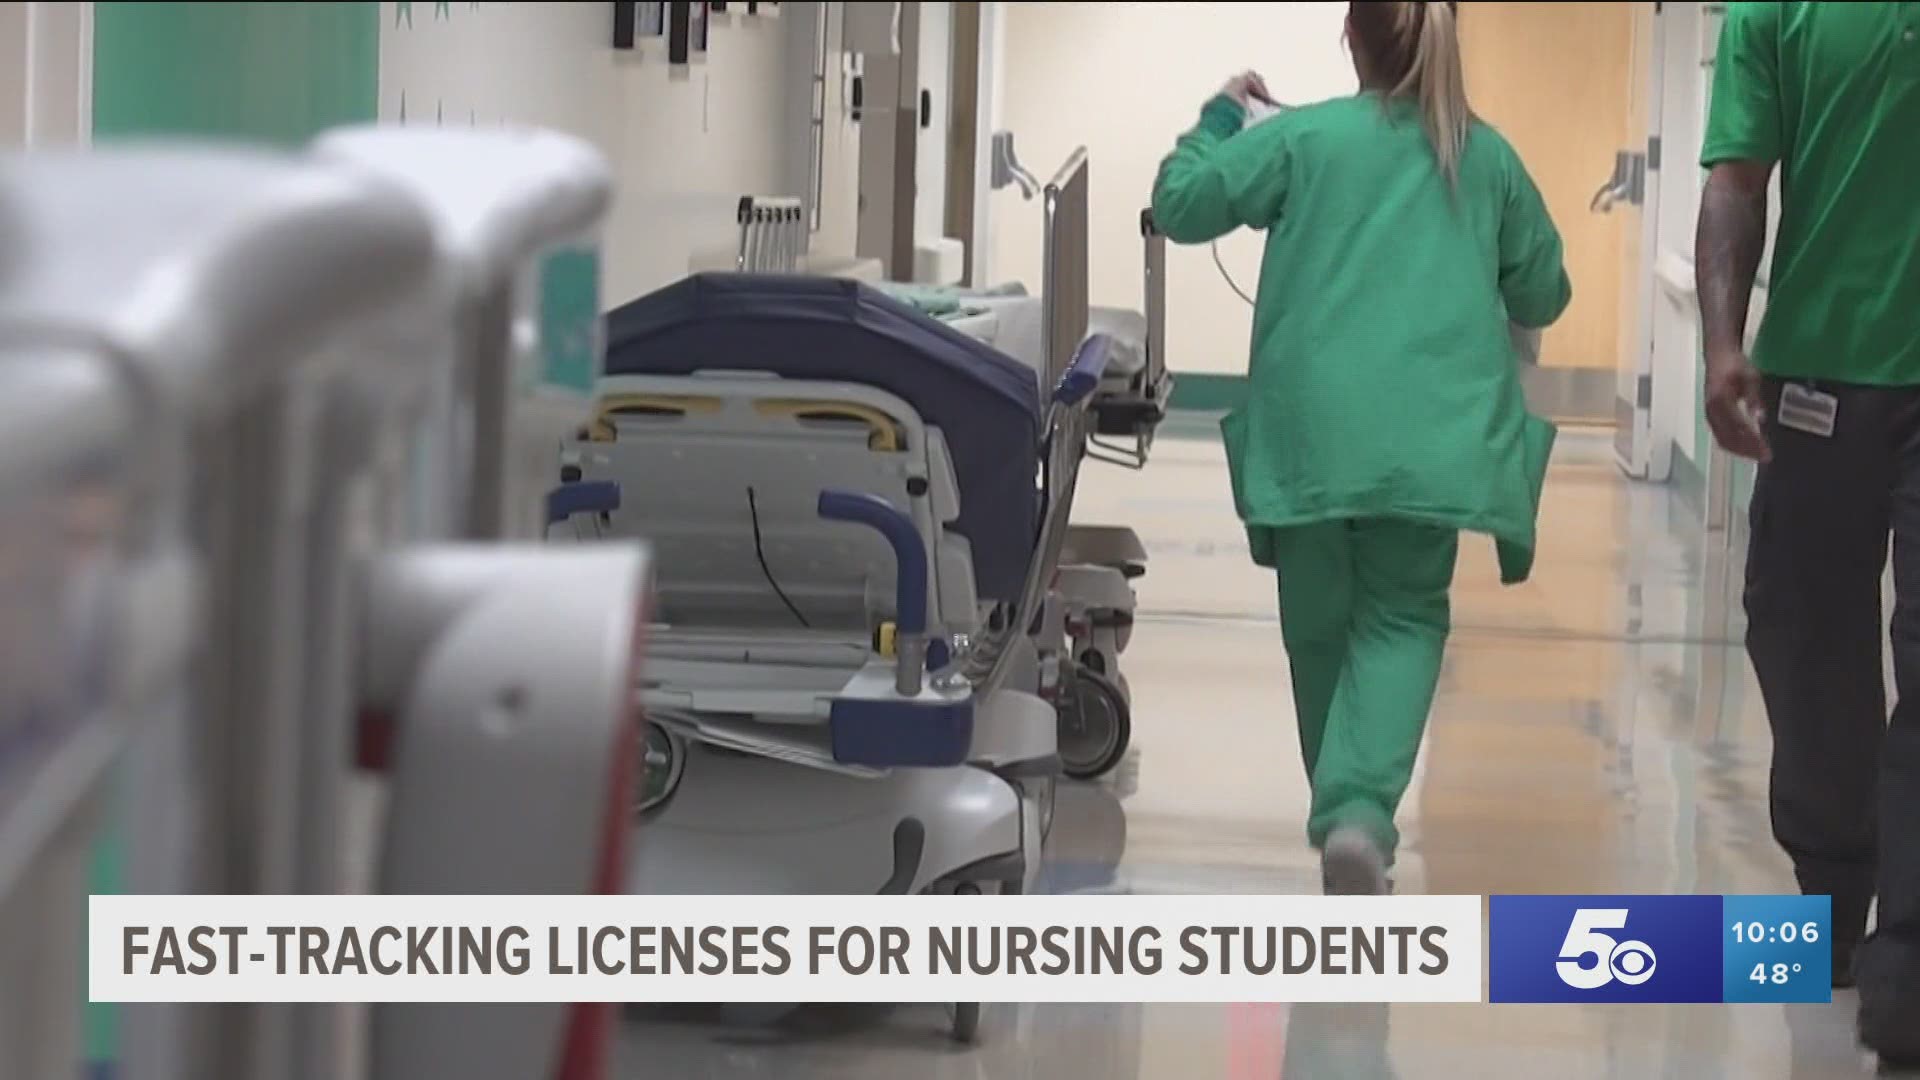 Gov. Hutchinson said he will fast track 1,104 nursing students so they can alleviate the stress in Arkansas hospitals. https://bit.ly/2J3d3AX